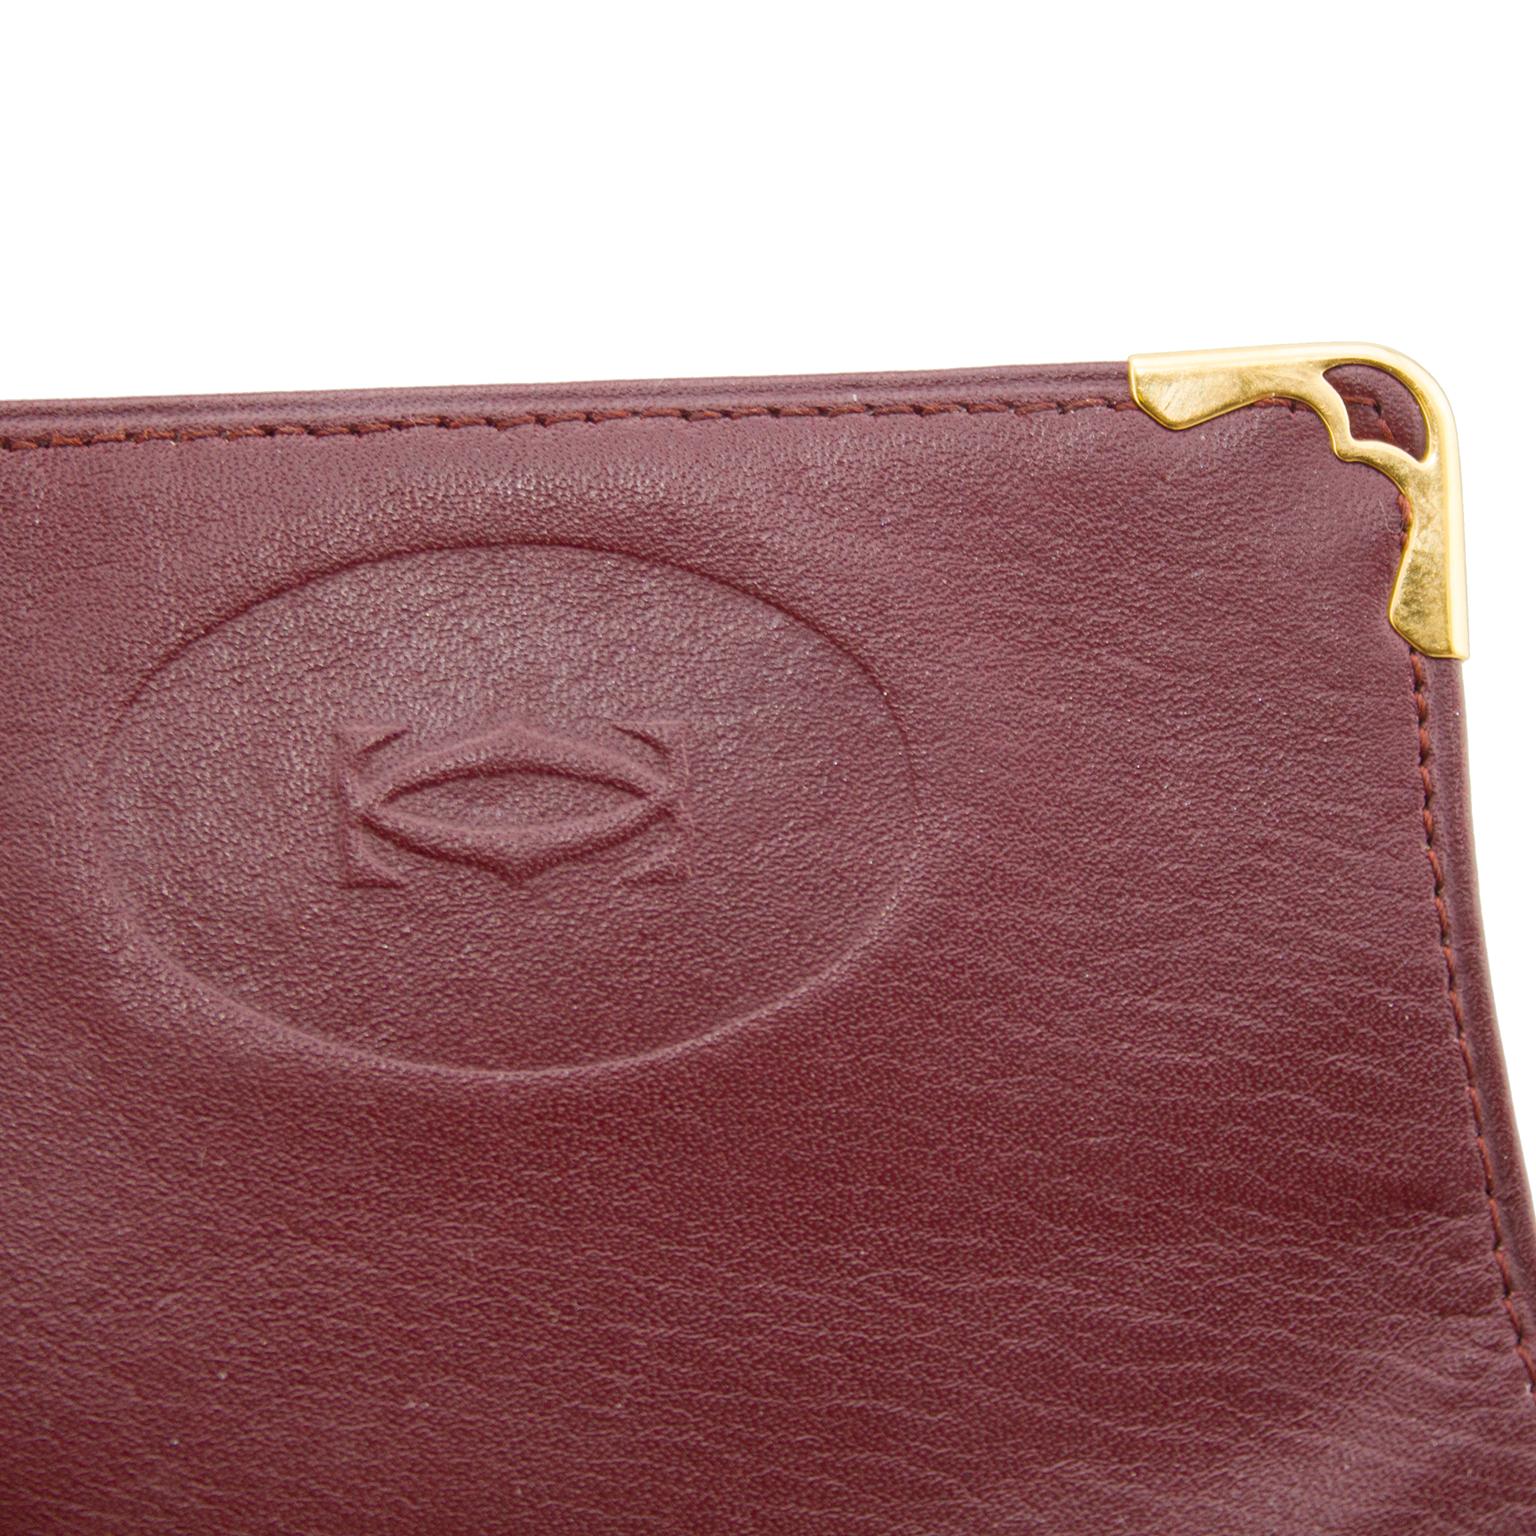 1980s Cartier Burgundy Leather Billfold Wallet With Fold-Over Closure In Good Condition In Toronto, Ontario